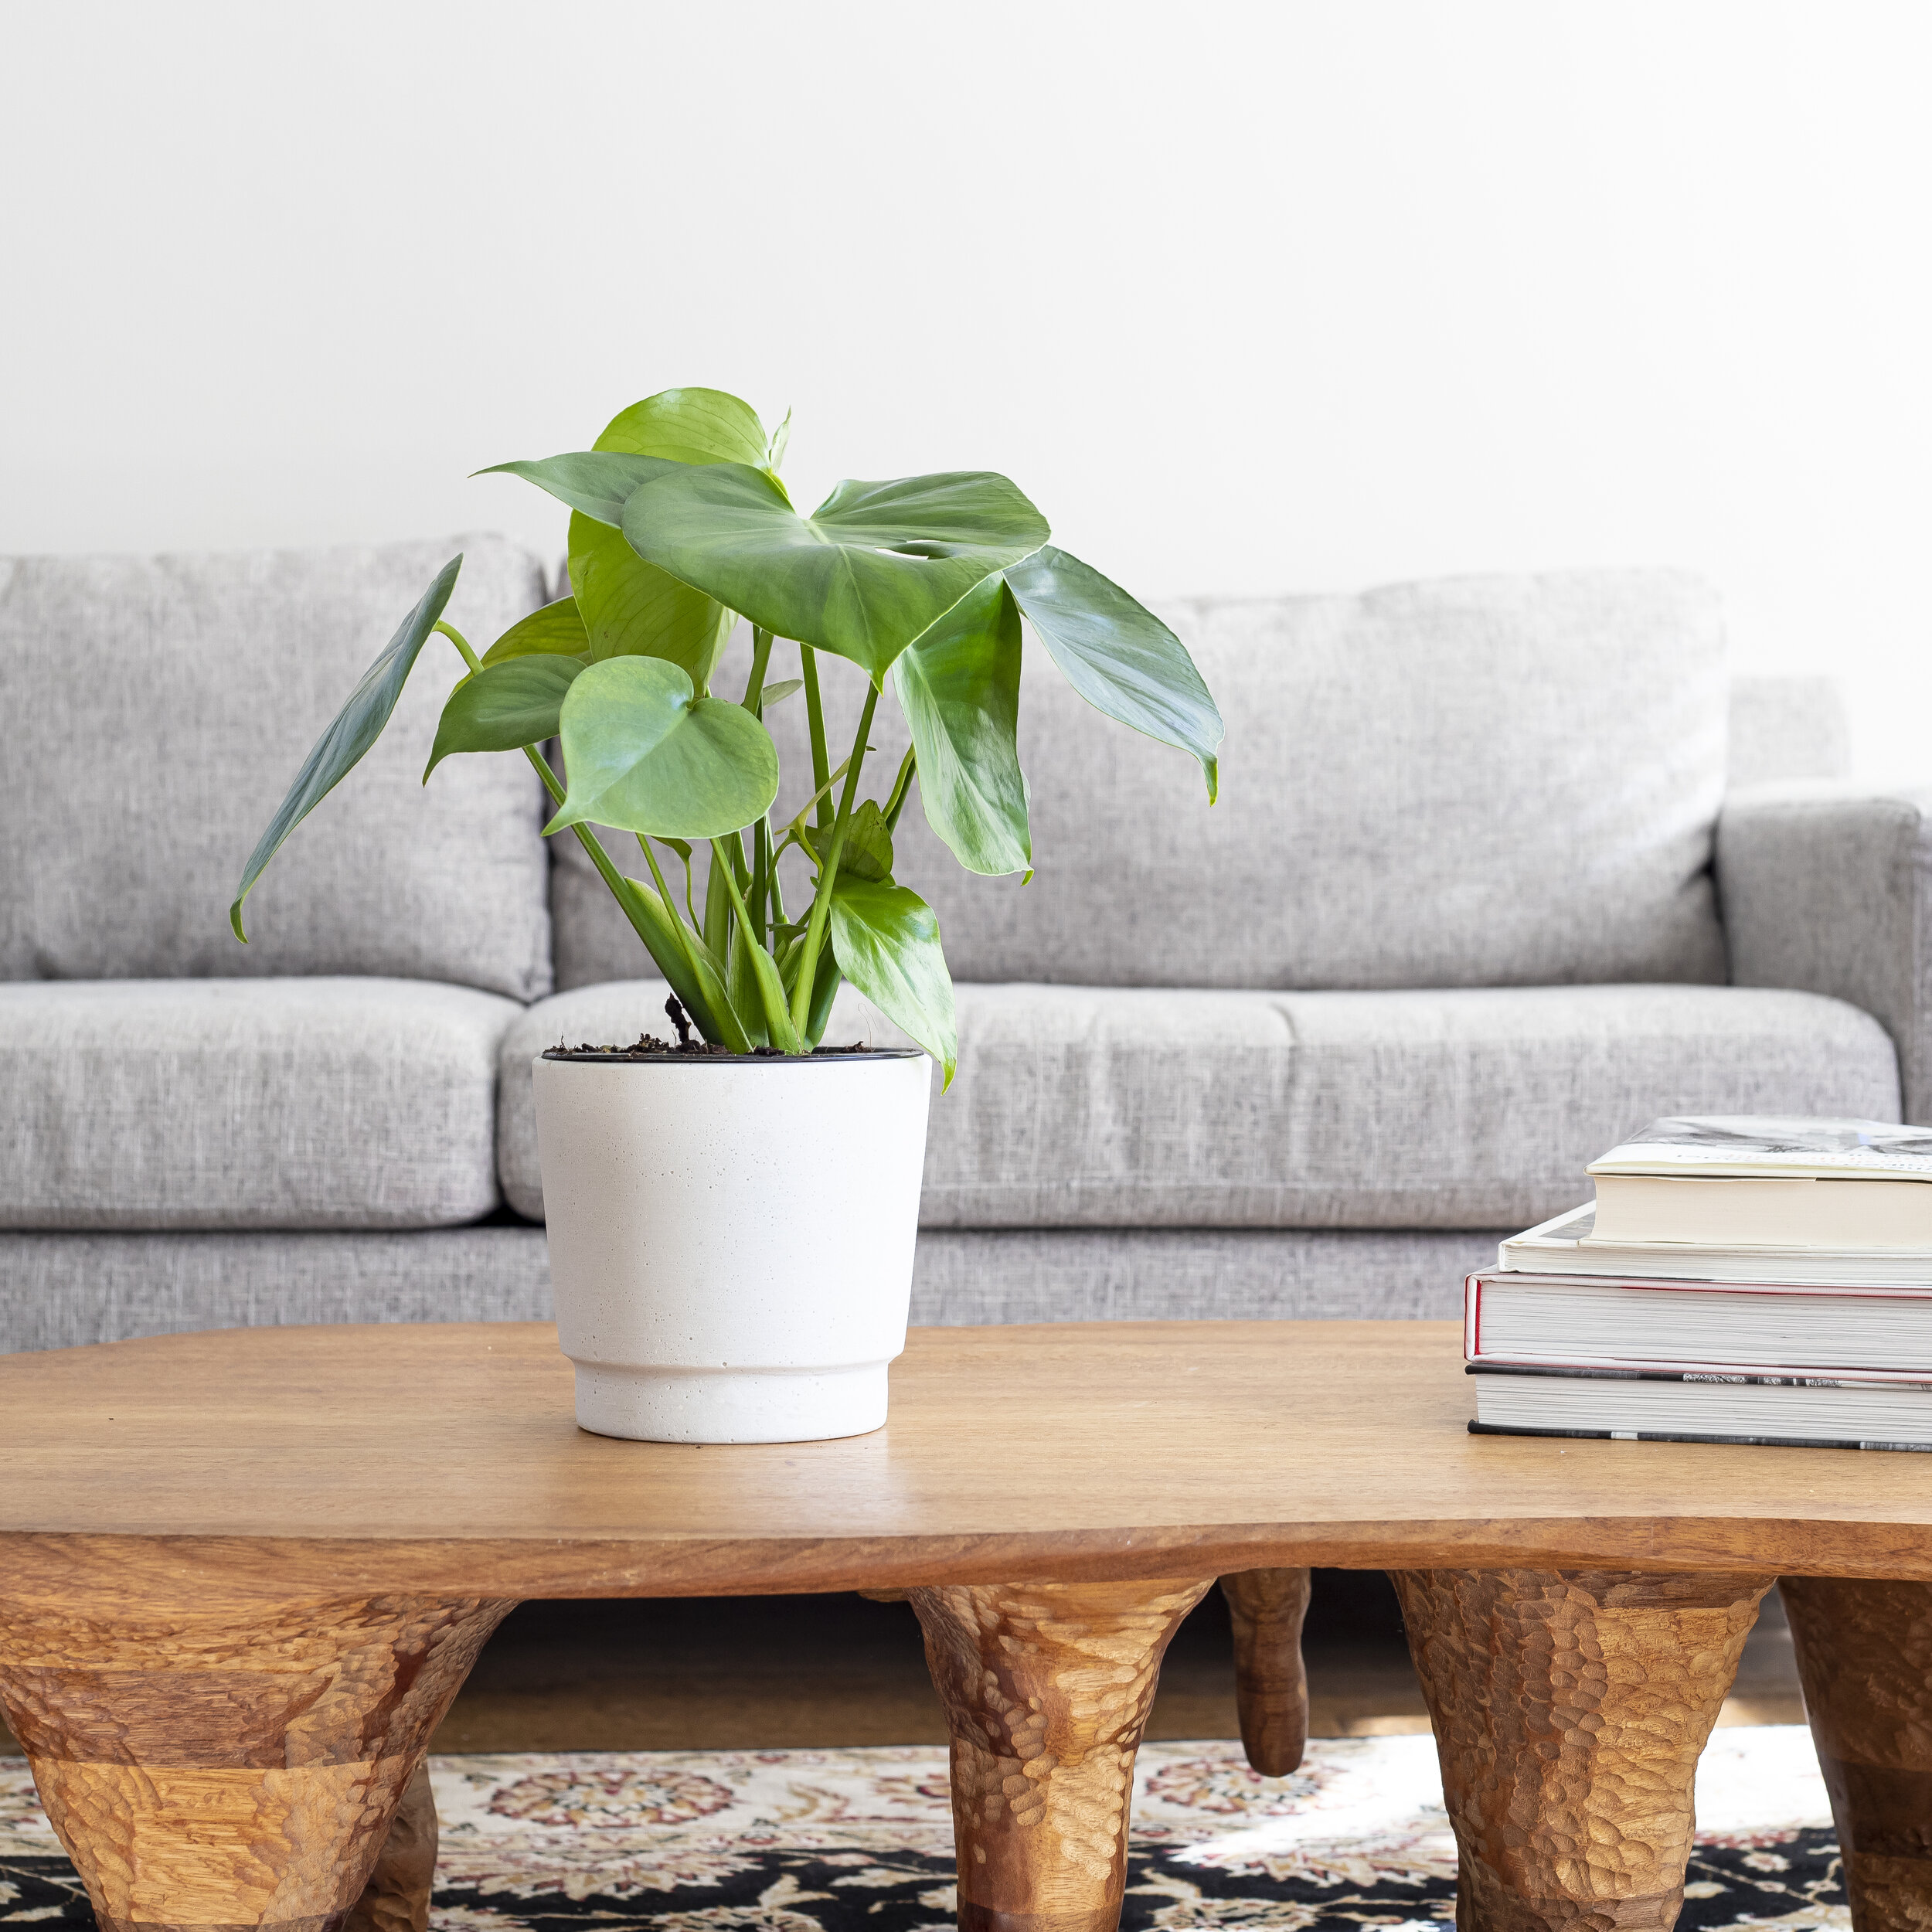 A green Monstera Deliciosa plant in a white pot sitting on a wooden table, with a few books beside it, in front of a gray couch